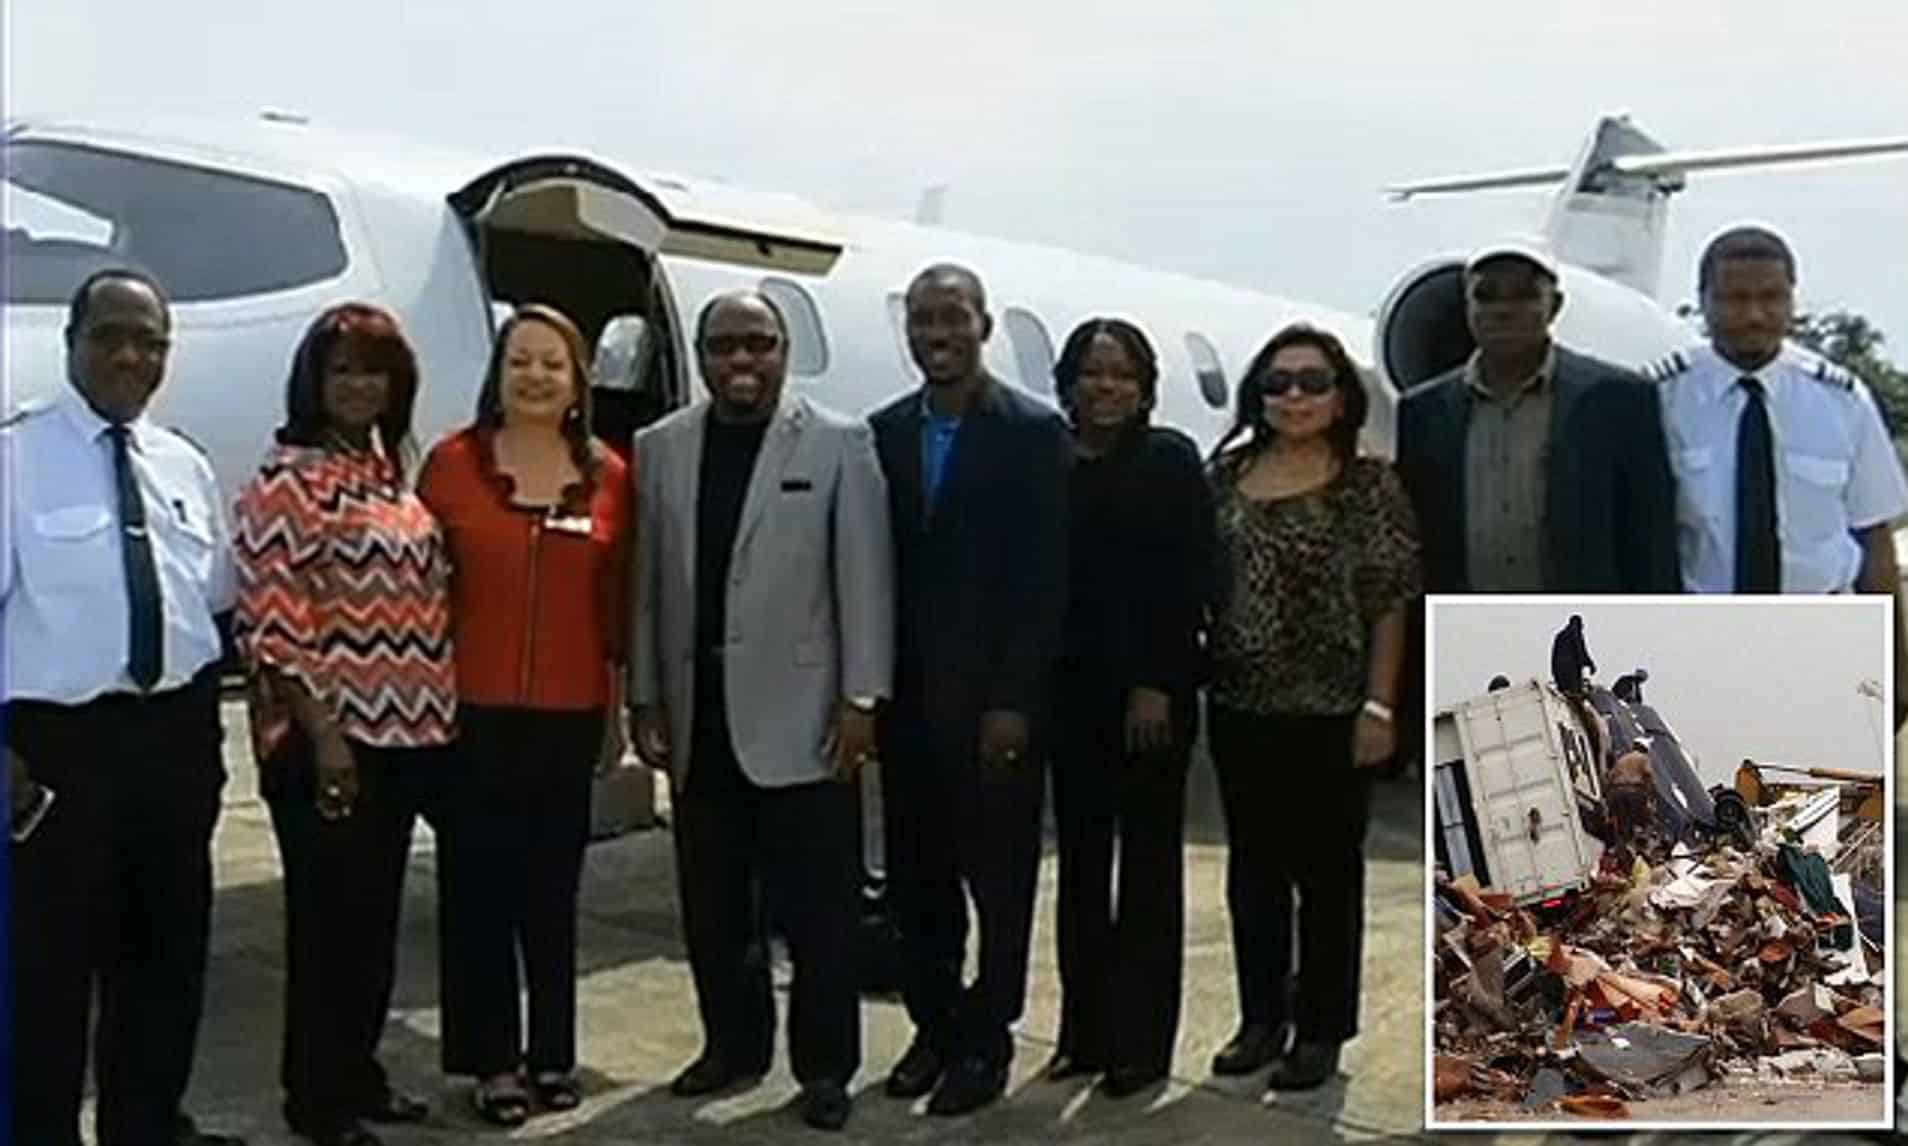 Myles Munroe with all passengers on plane that crashed.